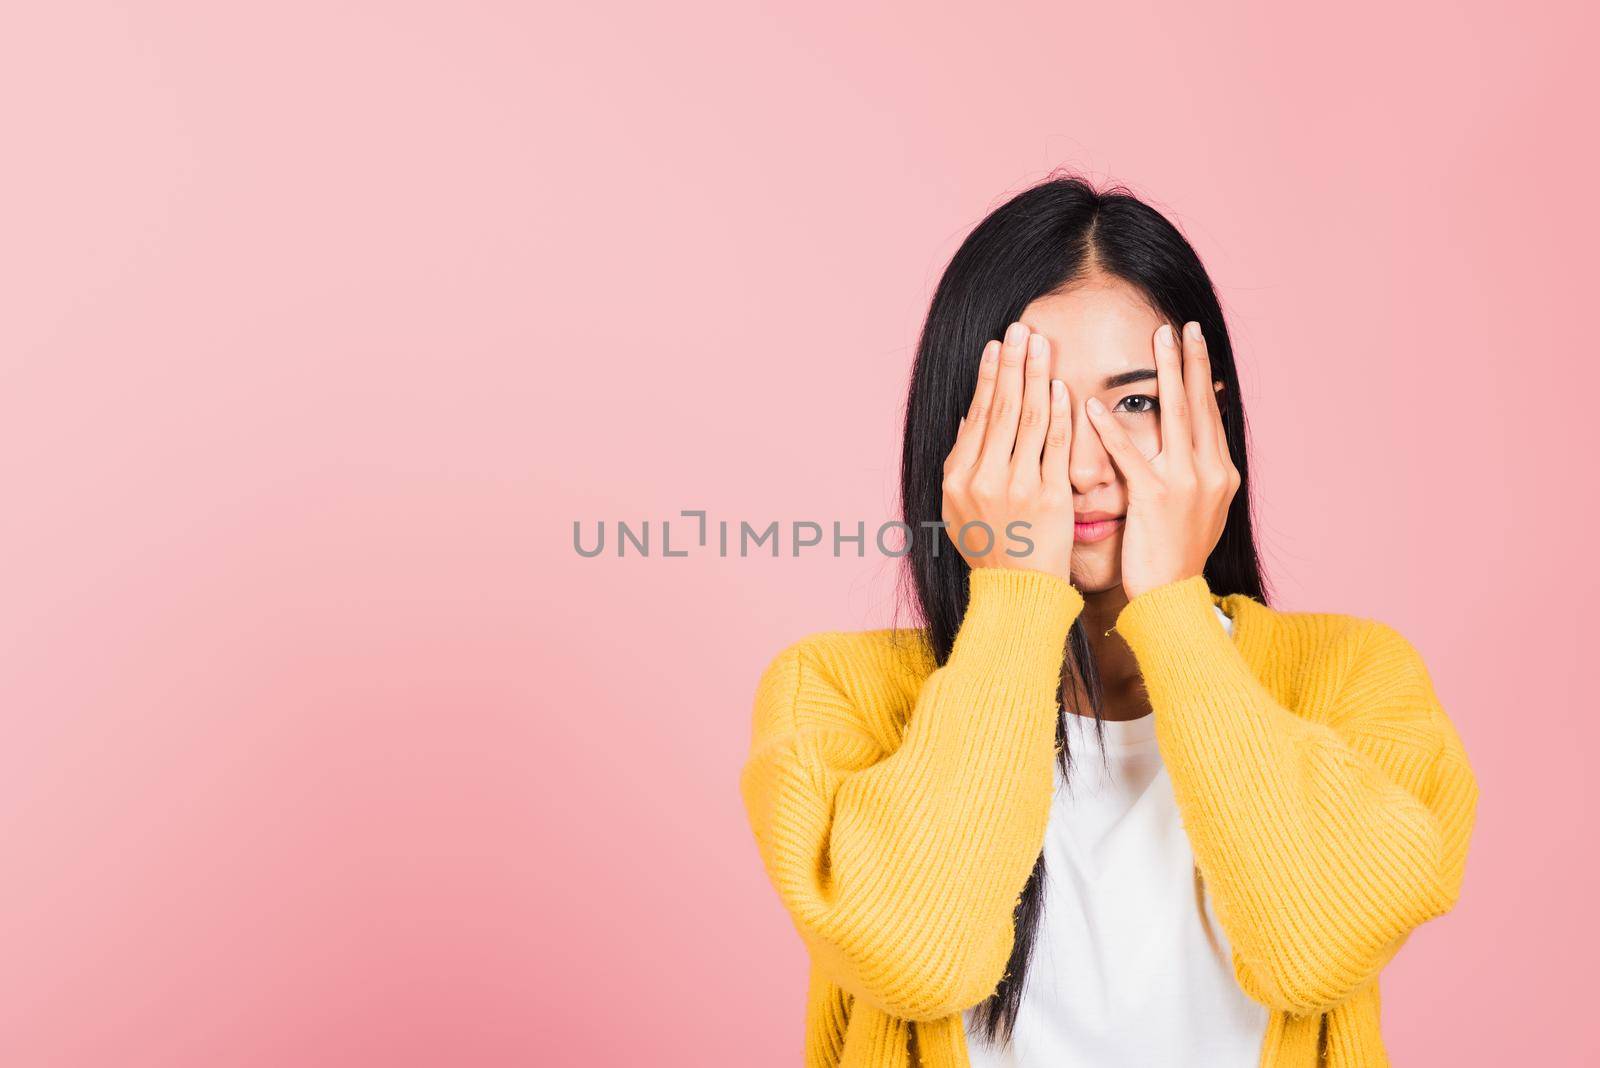 Asian portrait beautiful young woman in depressed bad mood covering face with hands and peering out with one eye between her fingers studio shot isolated on pink background surprised and shocked